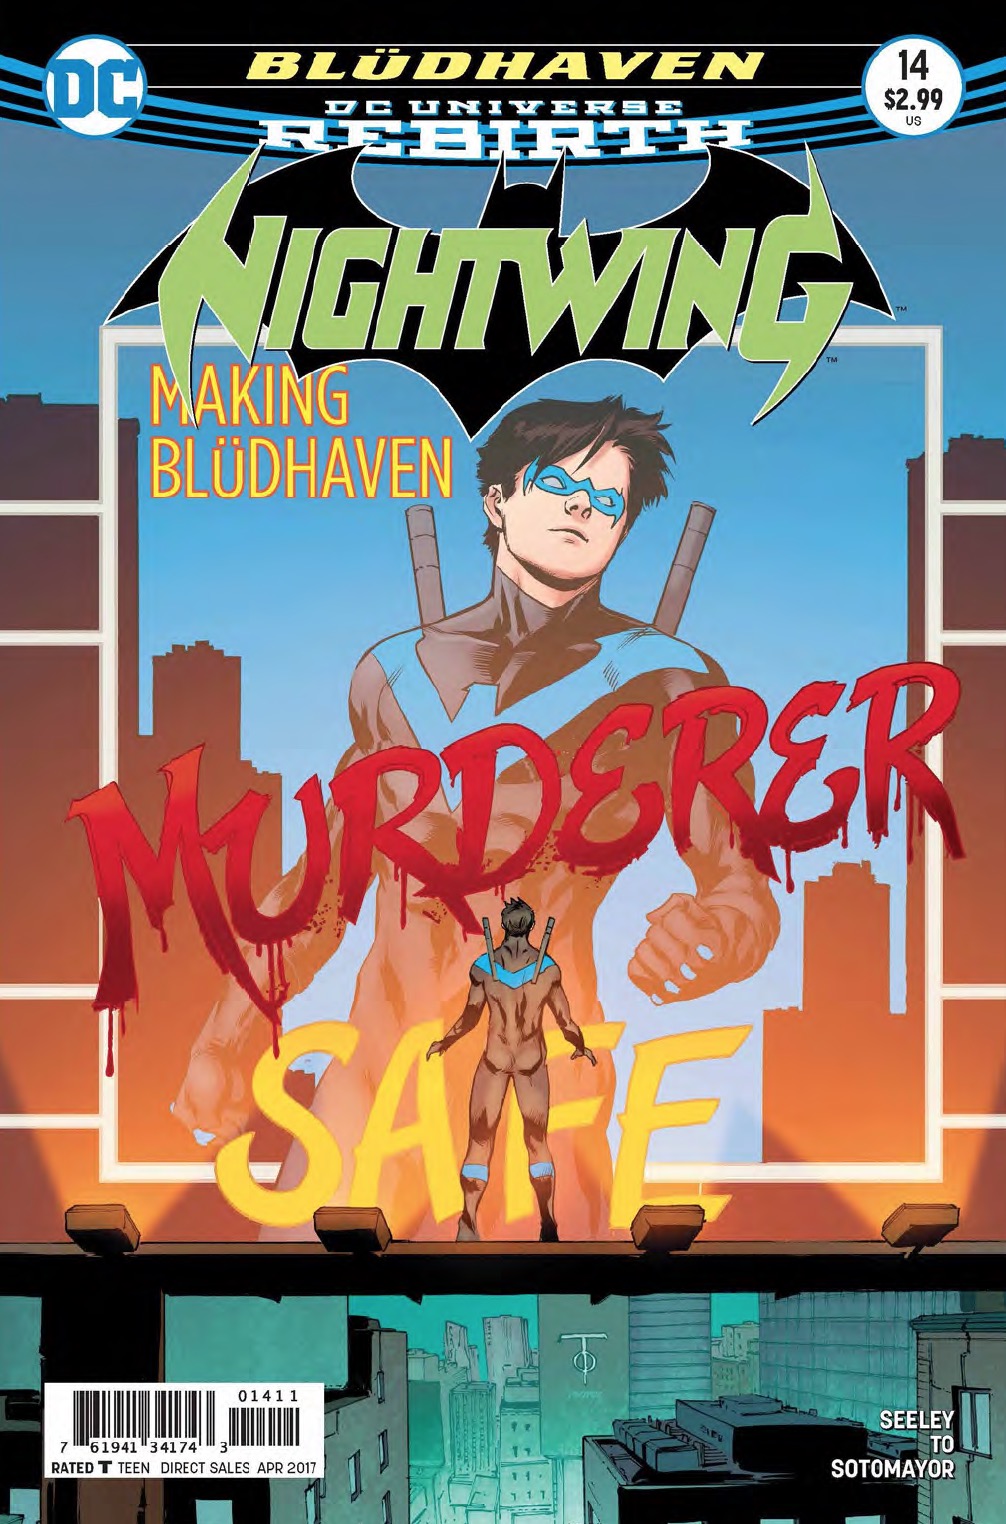 Nightwing #14 Review